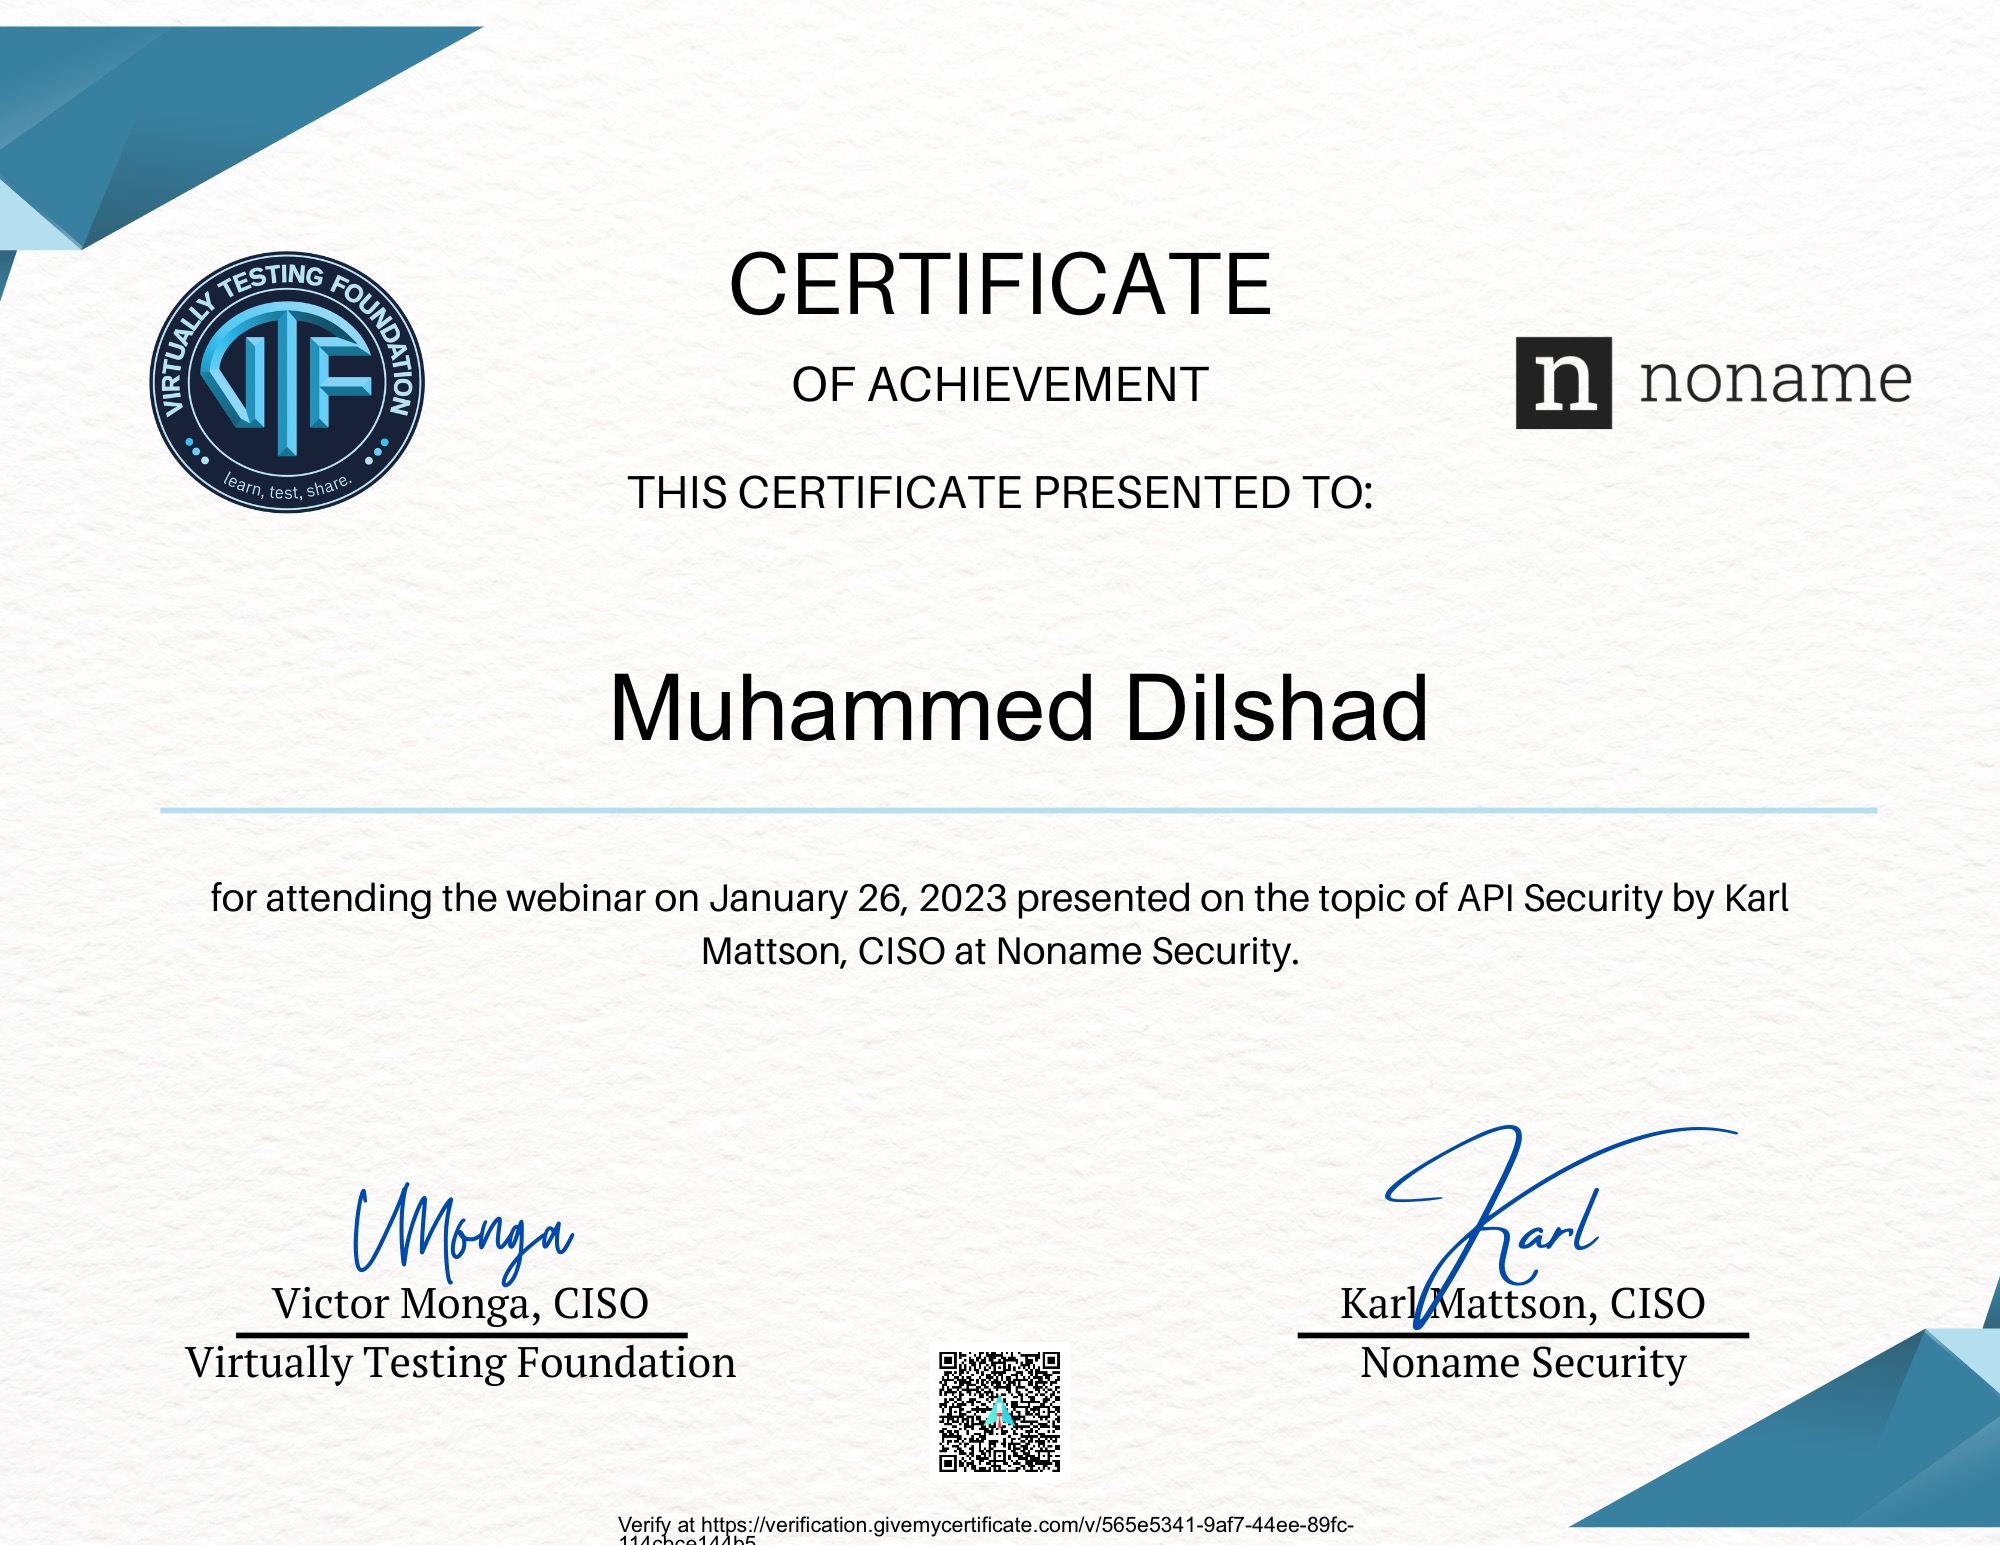 CERTIFICATE

OF ACHIEVEMENT noname

 

THIS CERTIFICATE PRESENTED TO:

Muhammed Dilshad

for attending the webinar on January 26, 2023 presented on the topic of API Security by Karl
Mattson, CISO at Noname Security.

Victor Monga, CISO
Virtually Testing Foundation

  

Sat A 2